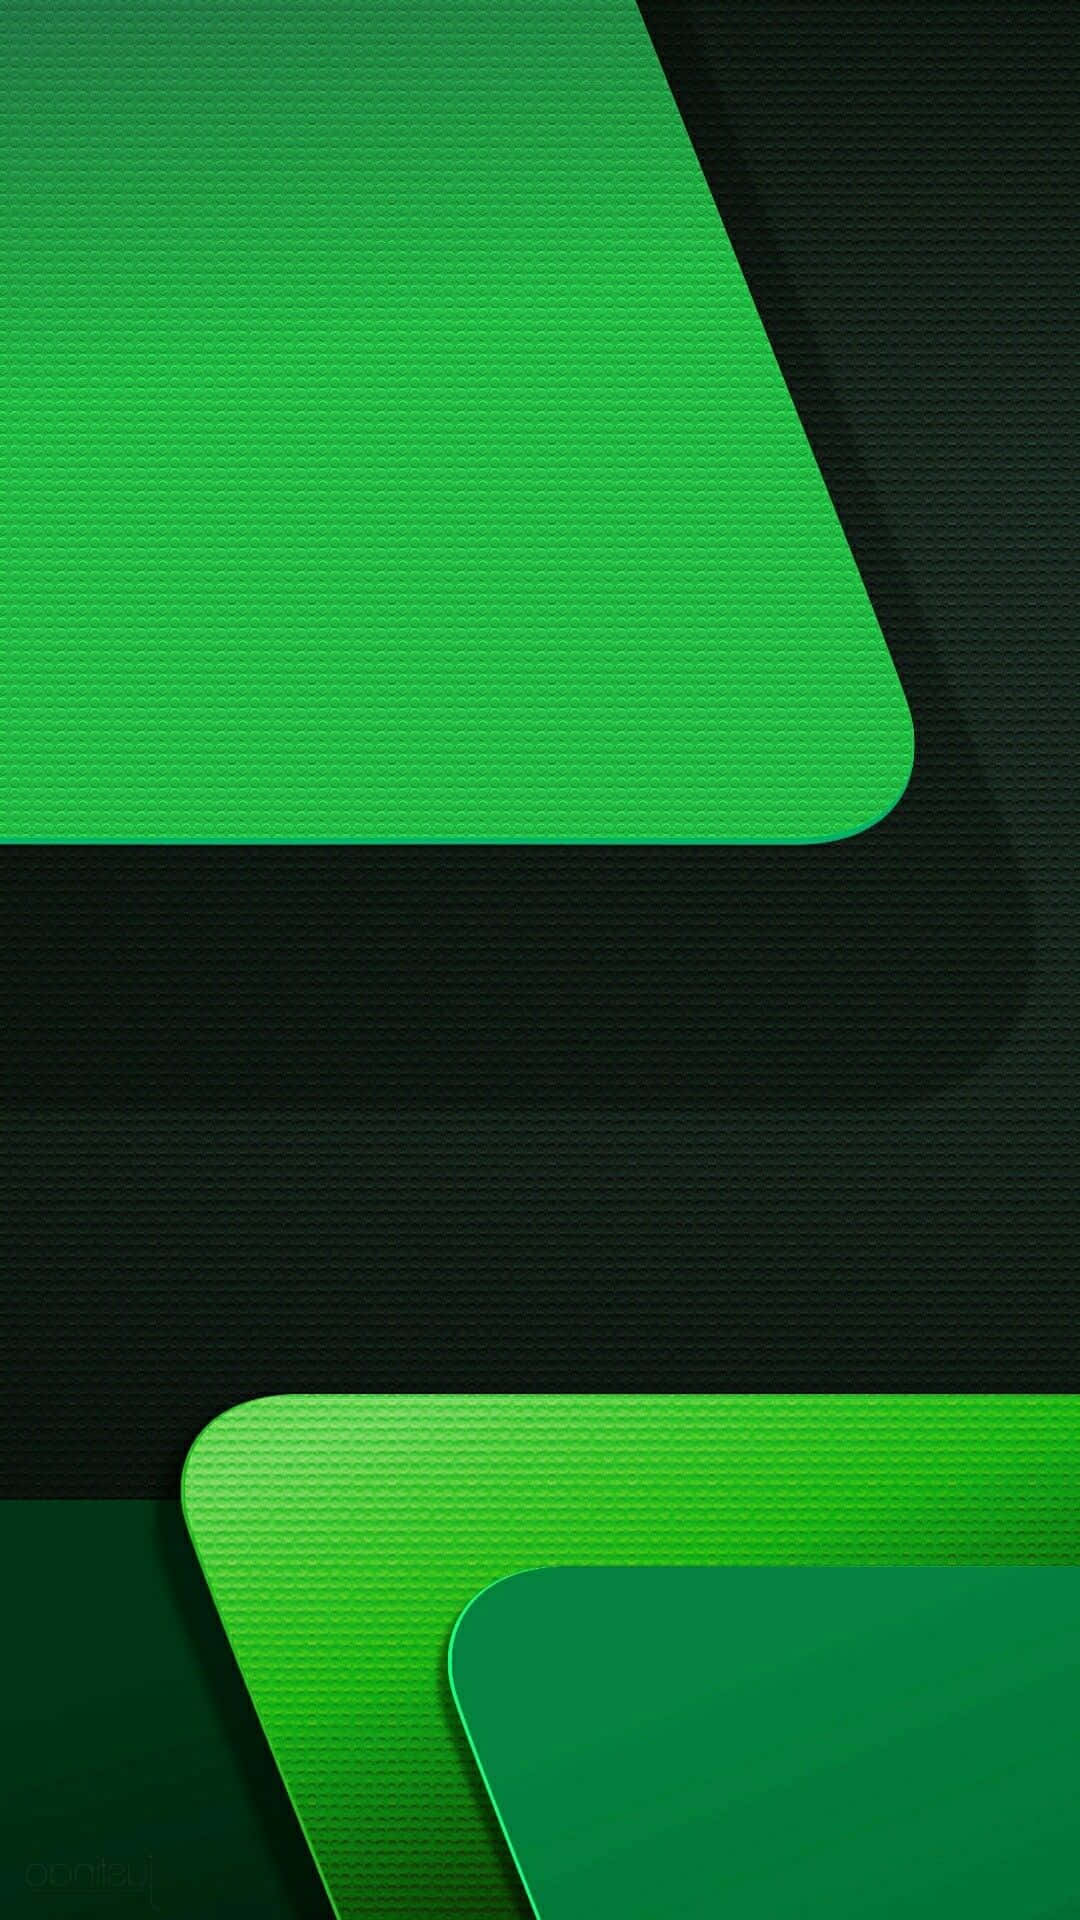 Sleek Green Phone on Abstract Background